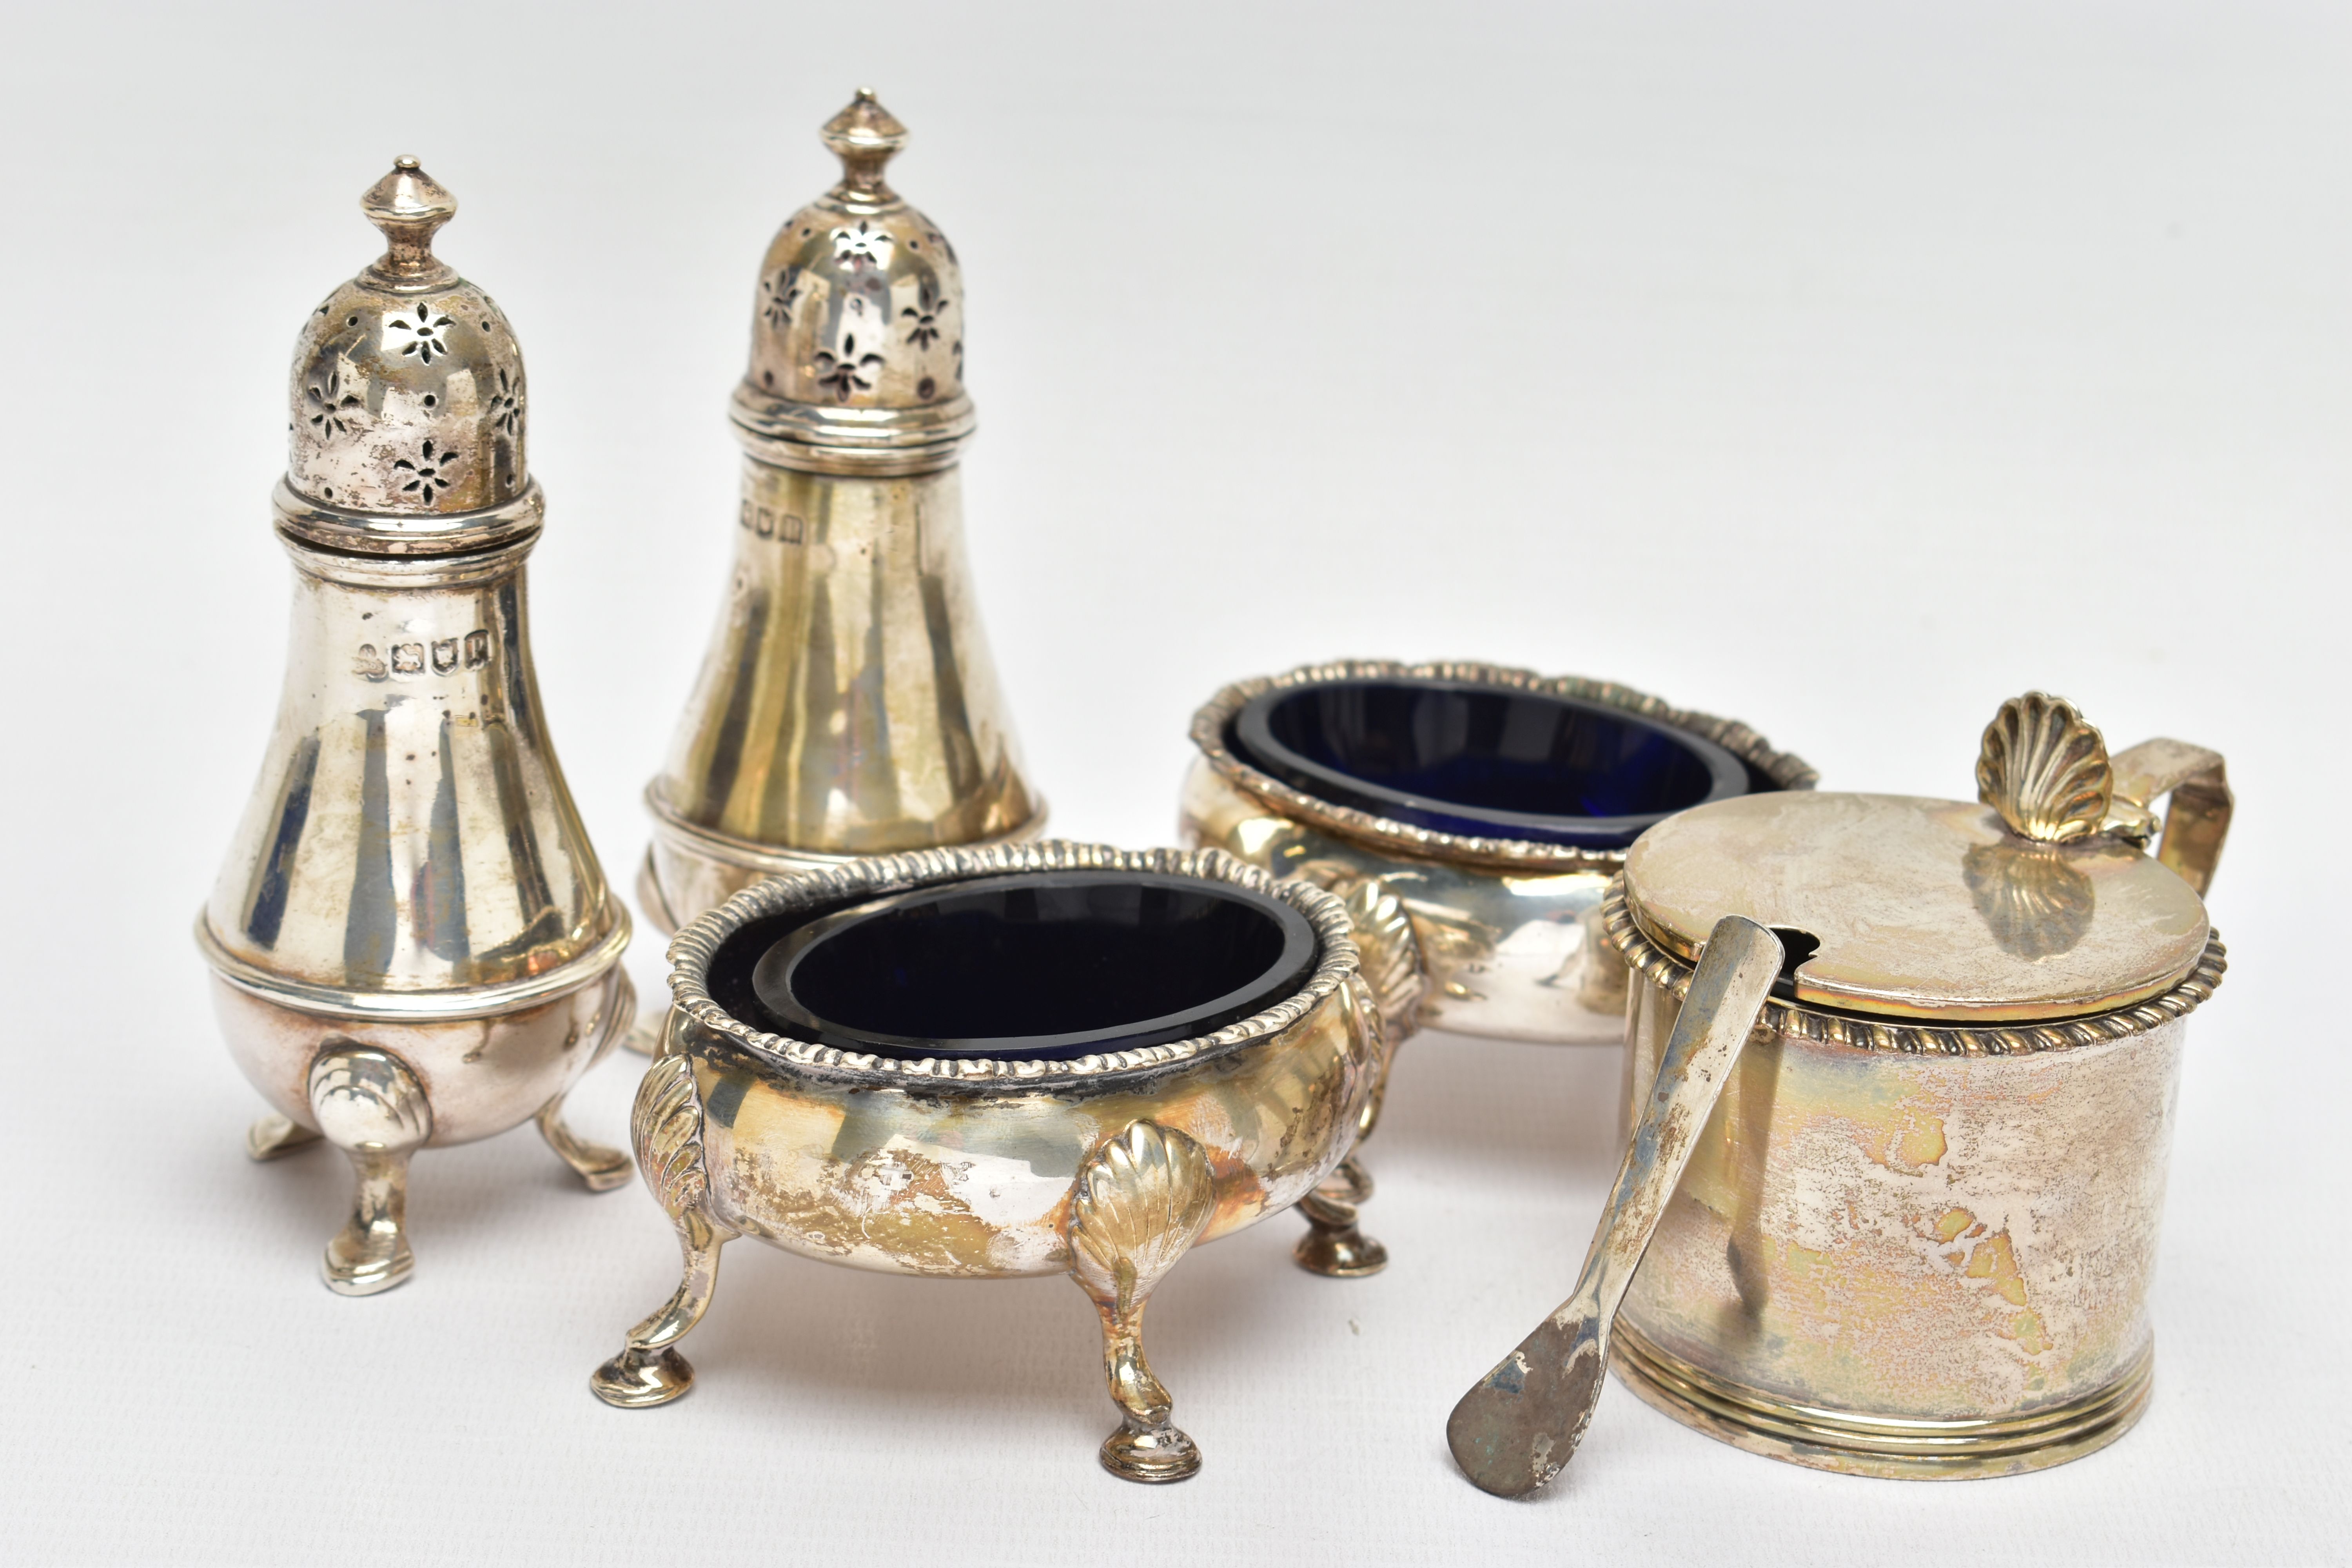 A PAIR OF GEORGE III SILVER OVAL SALTS AND THREE OTHER SILVER CRUET ITEMS, the oval salts with